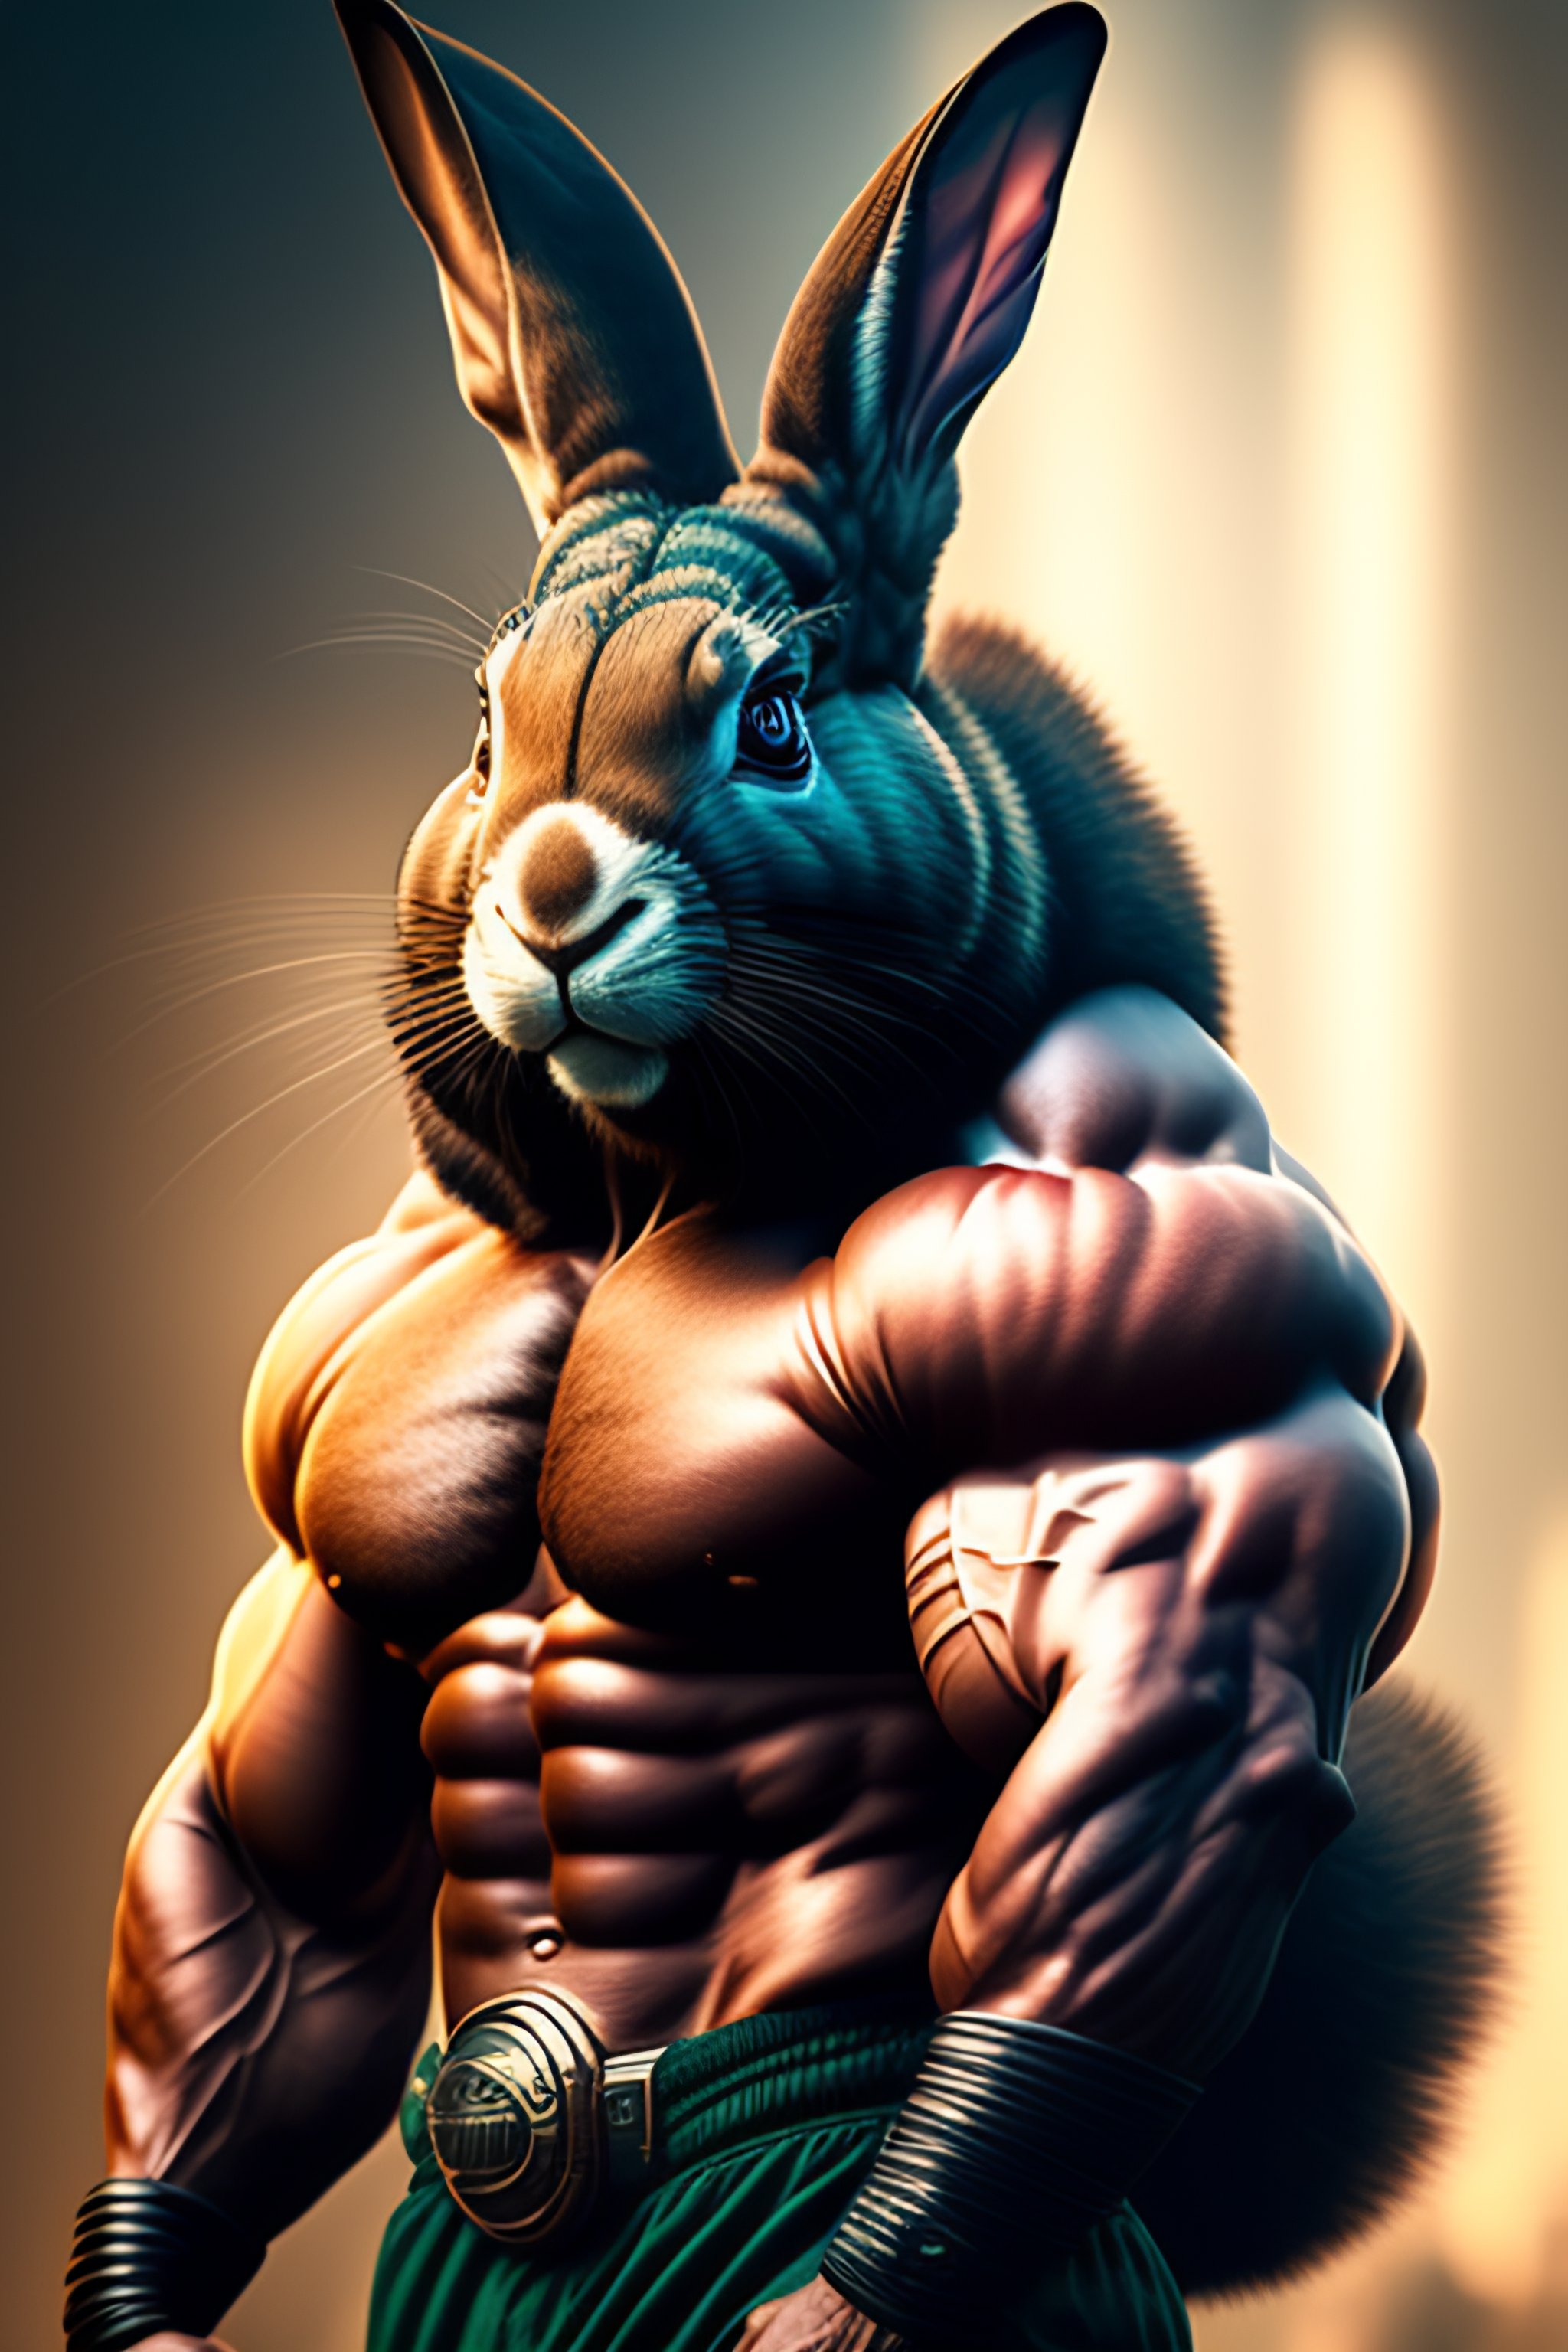 Lexica - A female muscle rabbit